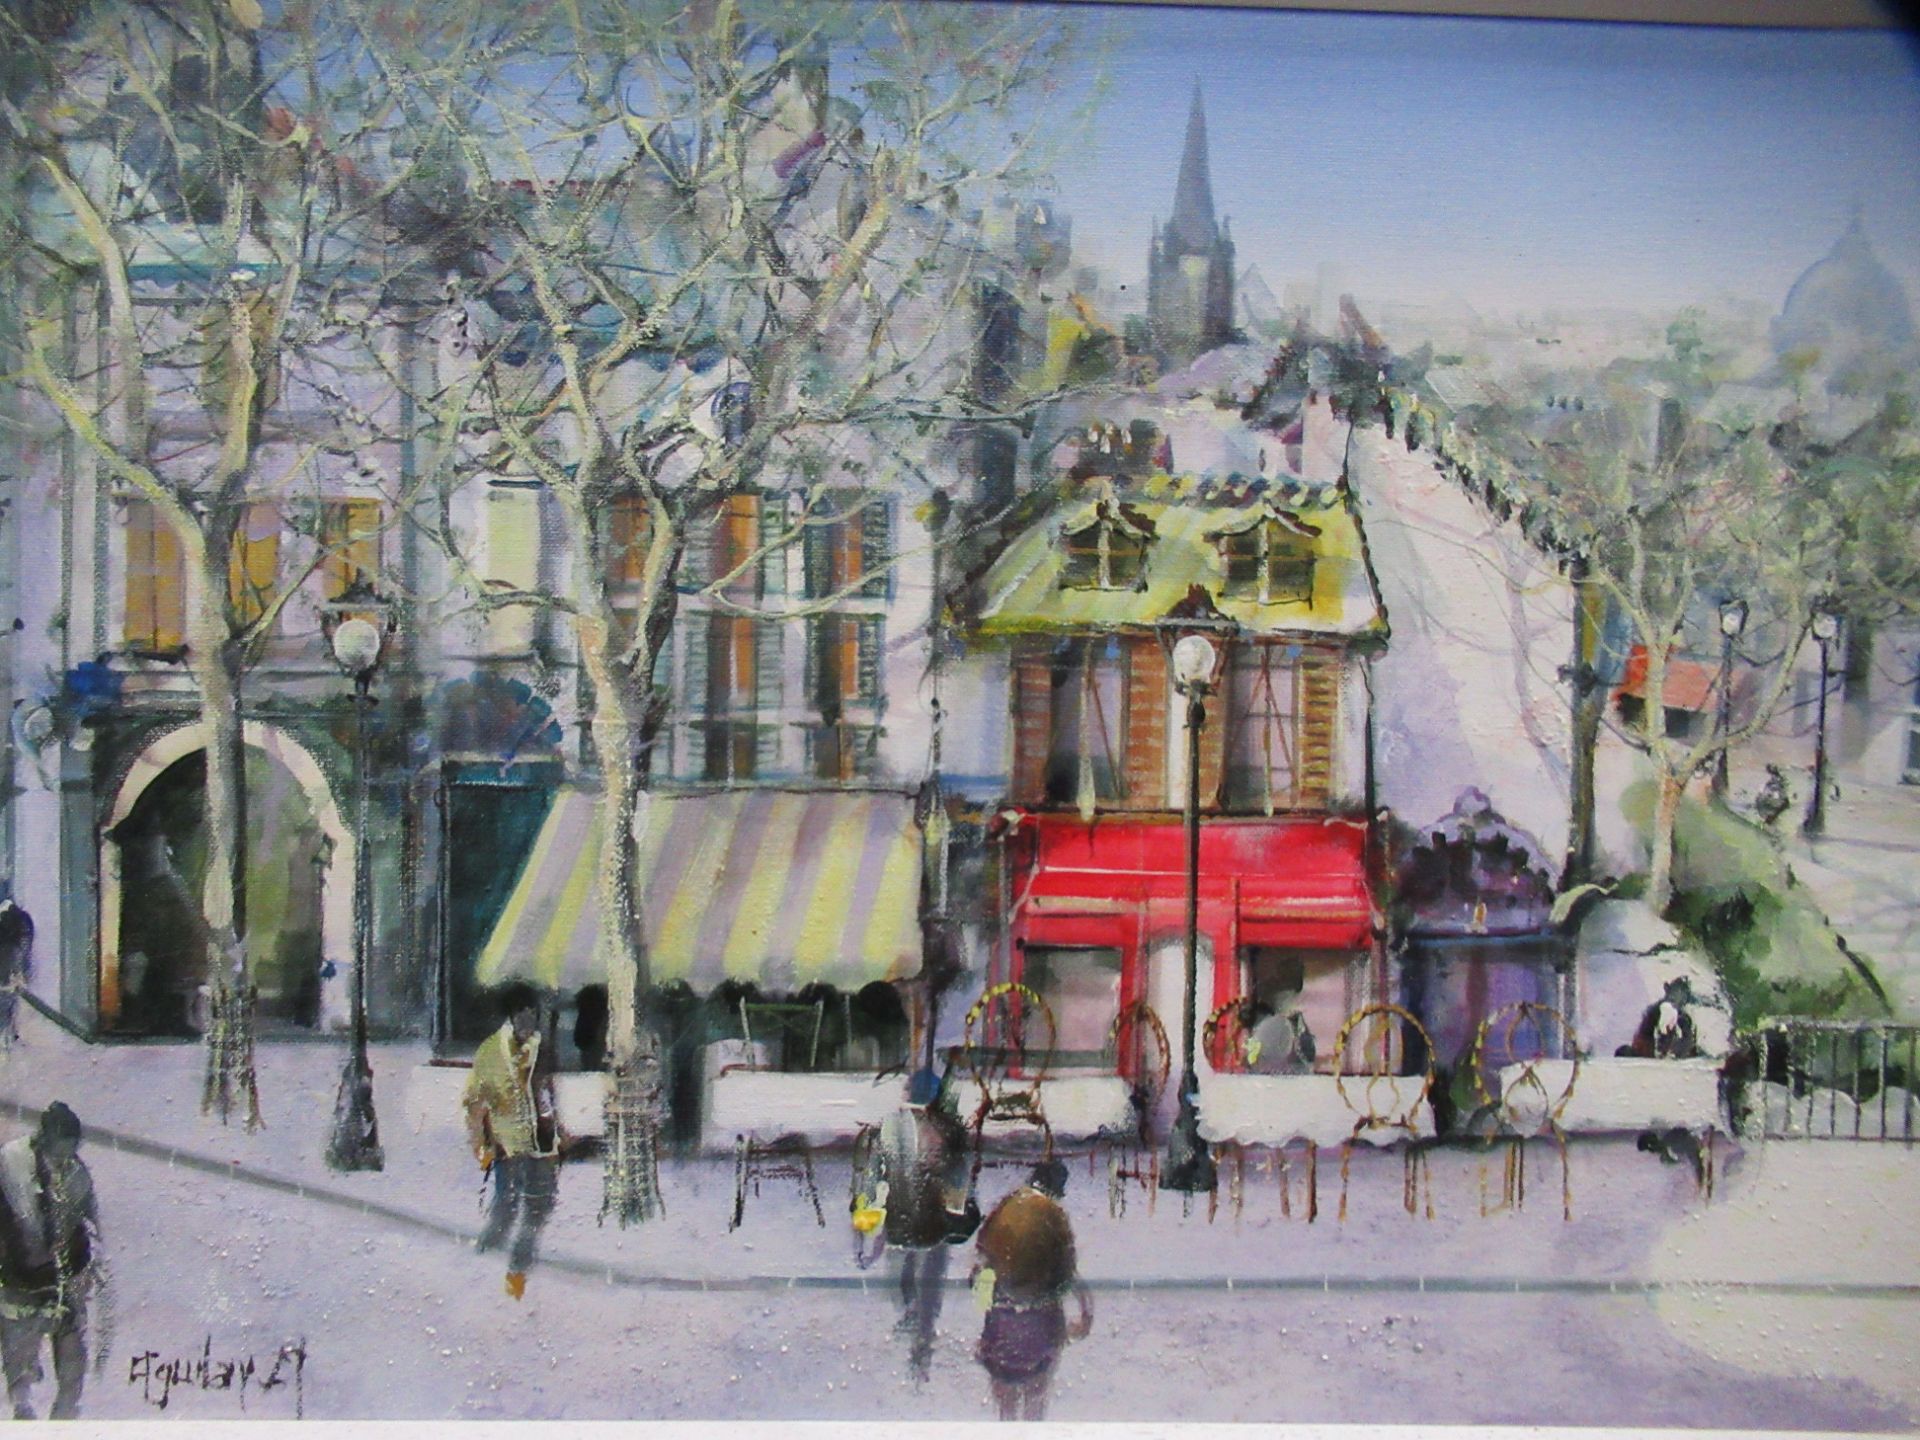 'European City Landscape Scene' Oil Painting by Jorge Aguilar-Agon, RRP £10,995 - Image 3 of 5